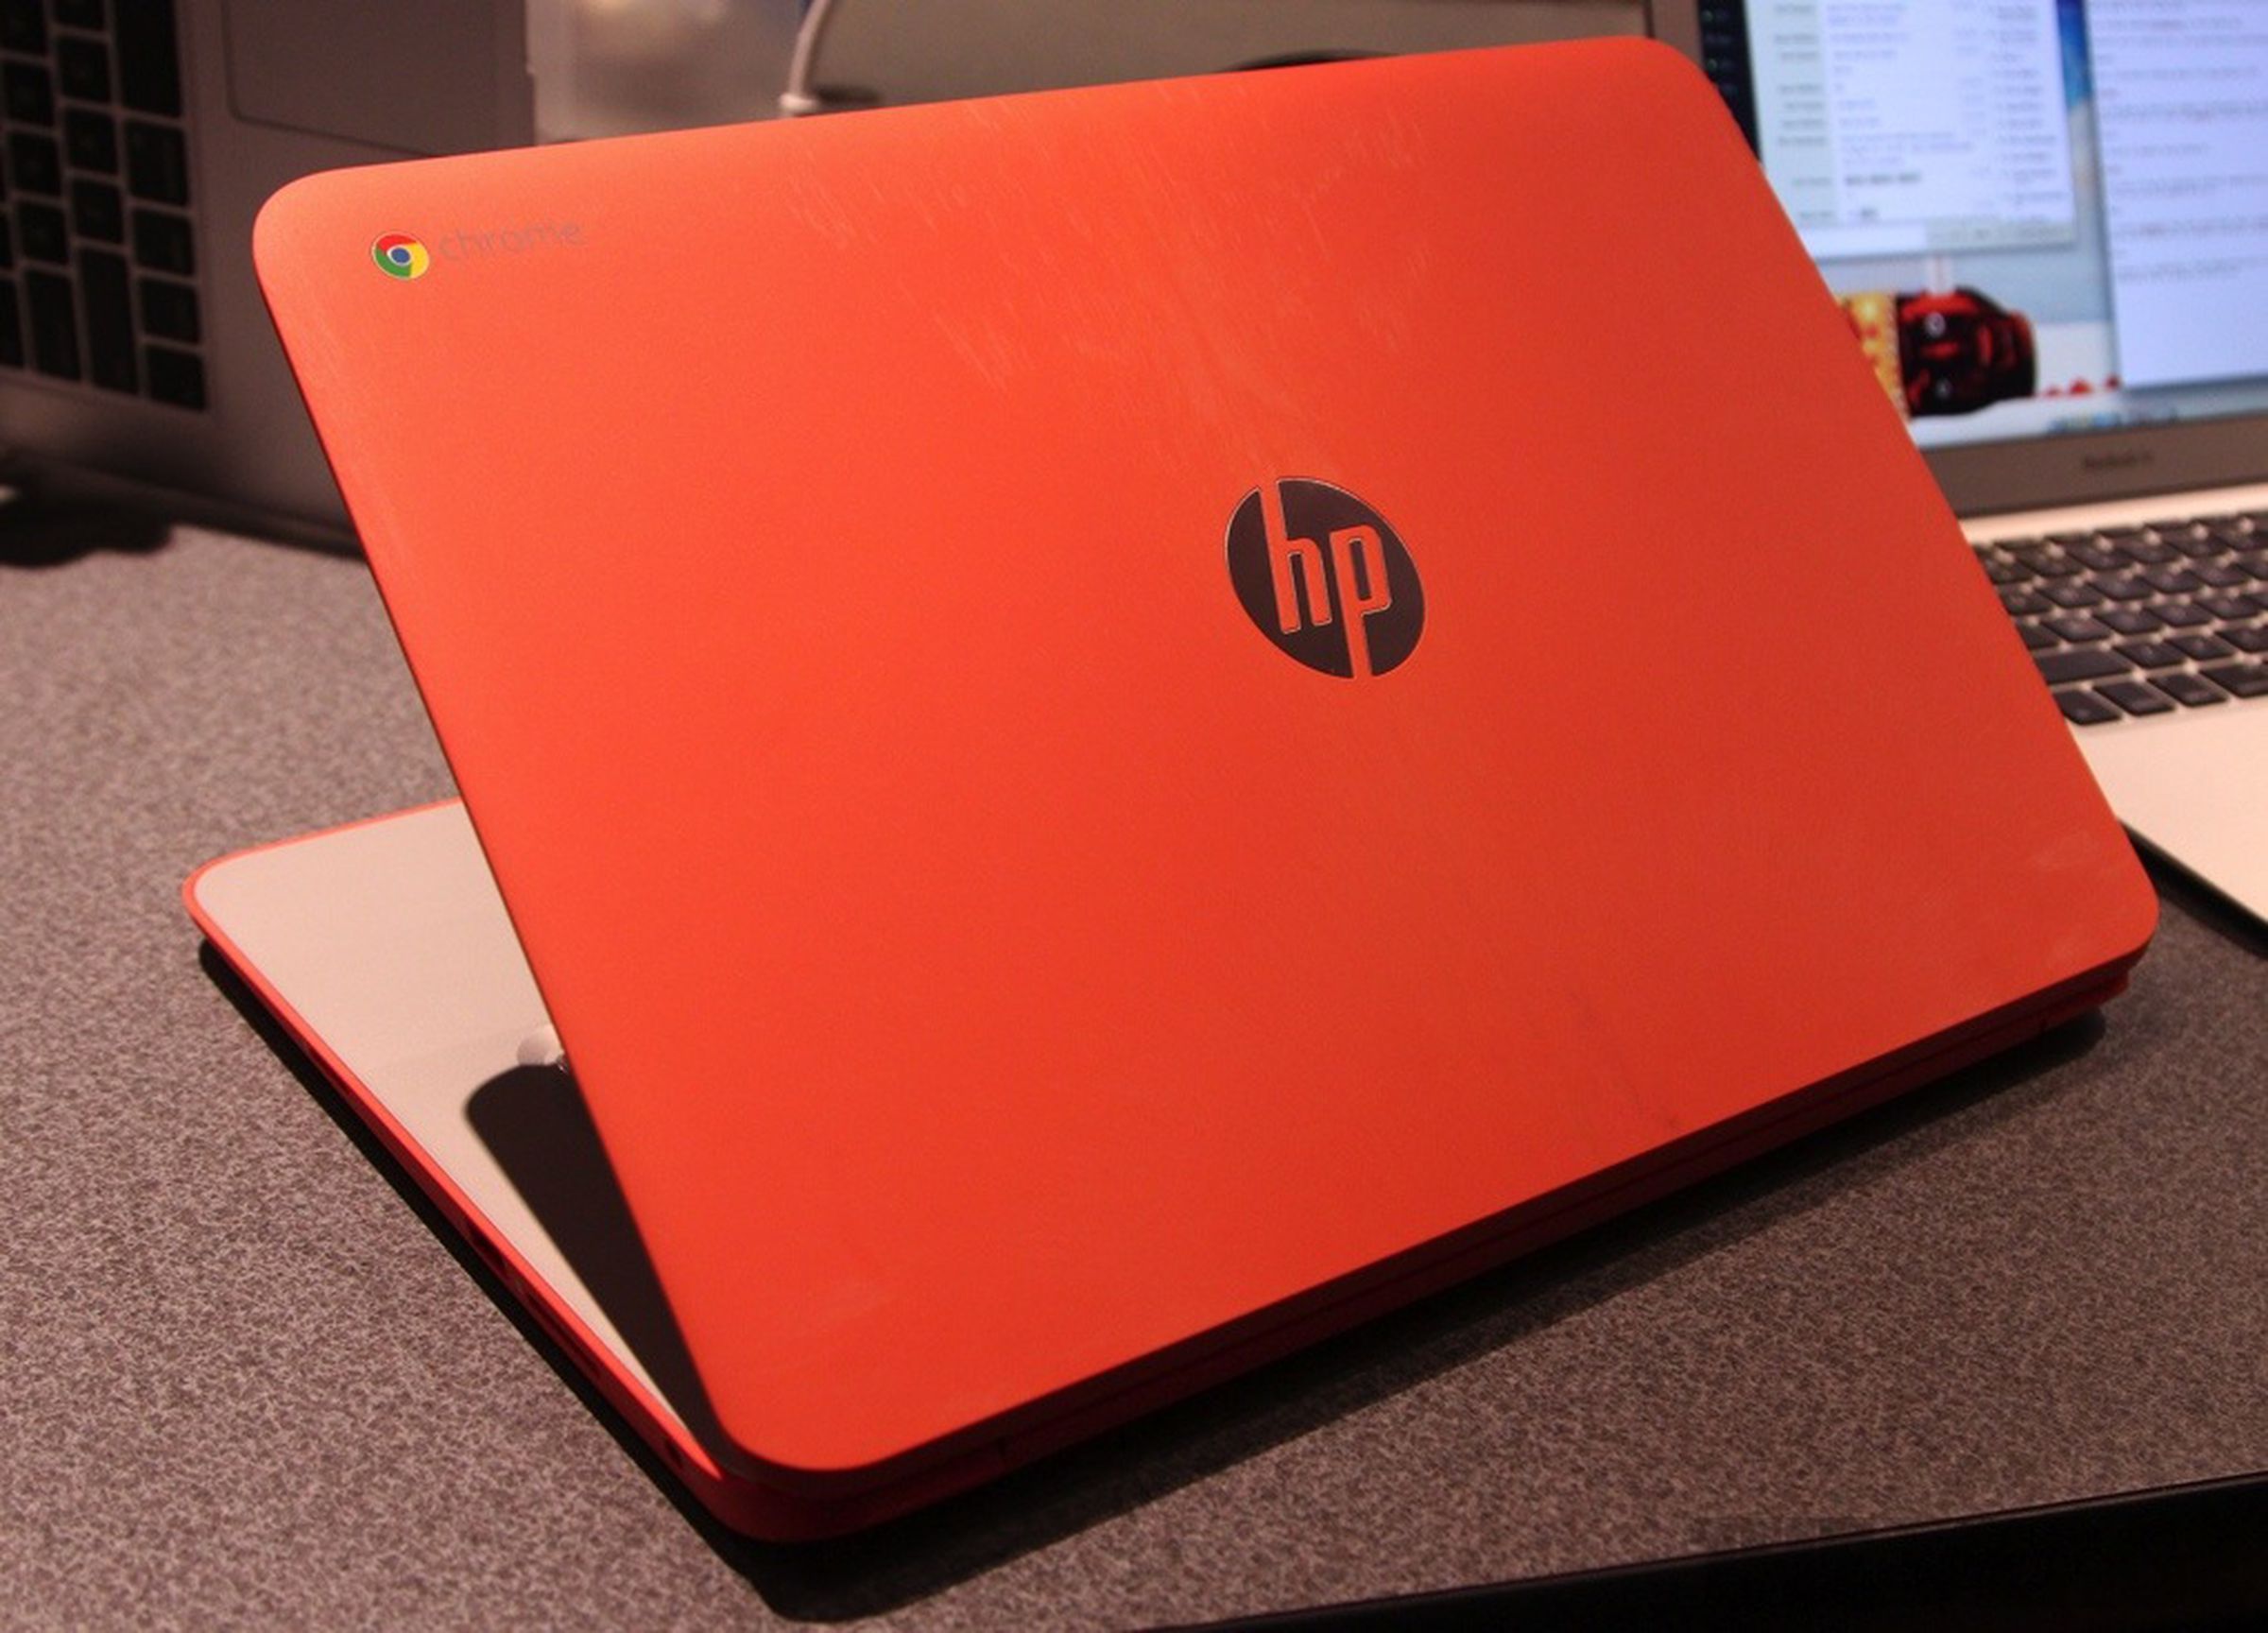 HP Chromebook 14 and Acer Chromebook hands-on pictures